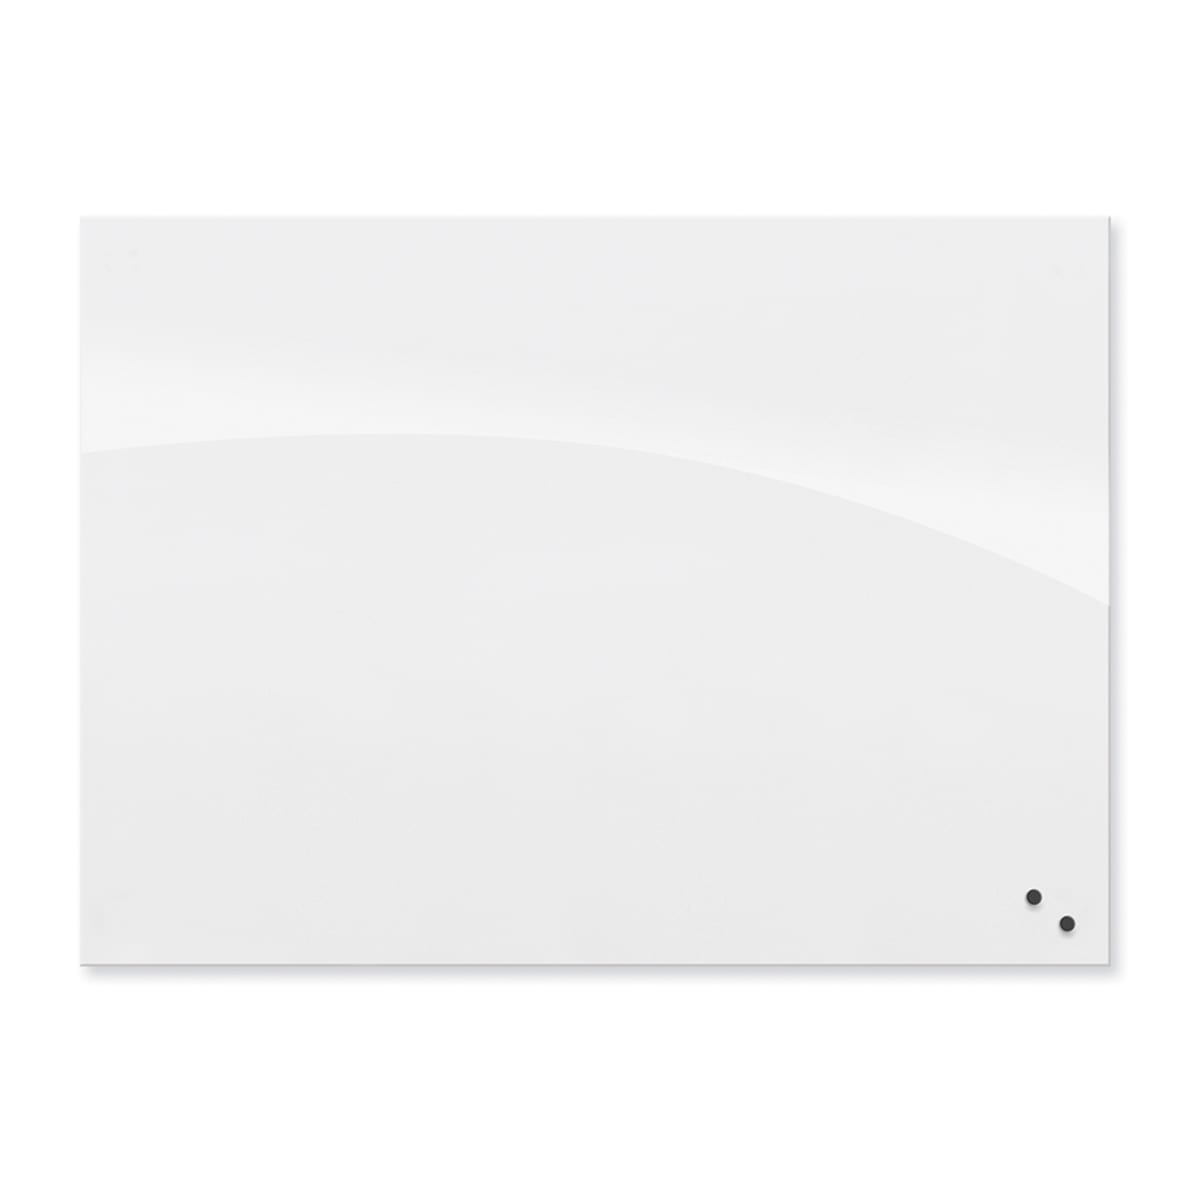 Mooreco InSight Low Iron Magnetic Glass Board - Gloss White - 3'H x 4'W (Mooreco 83908) - SchoolOutlet